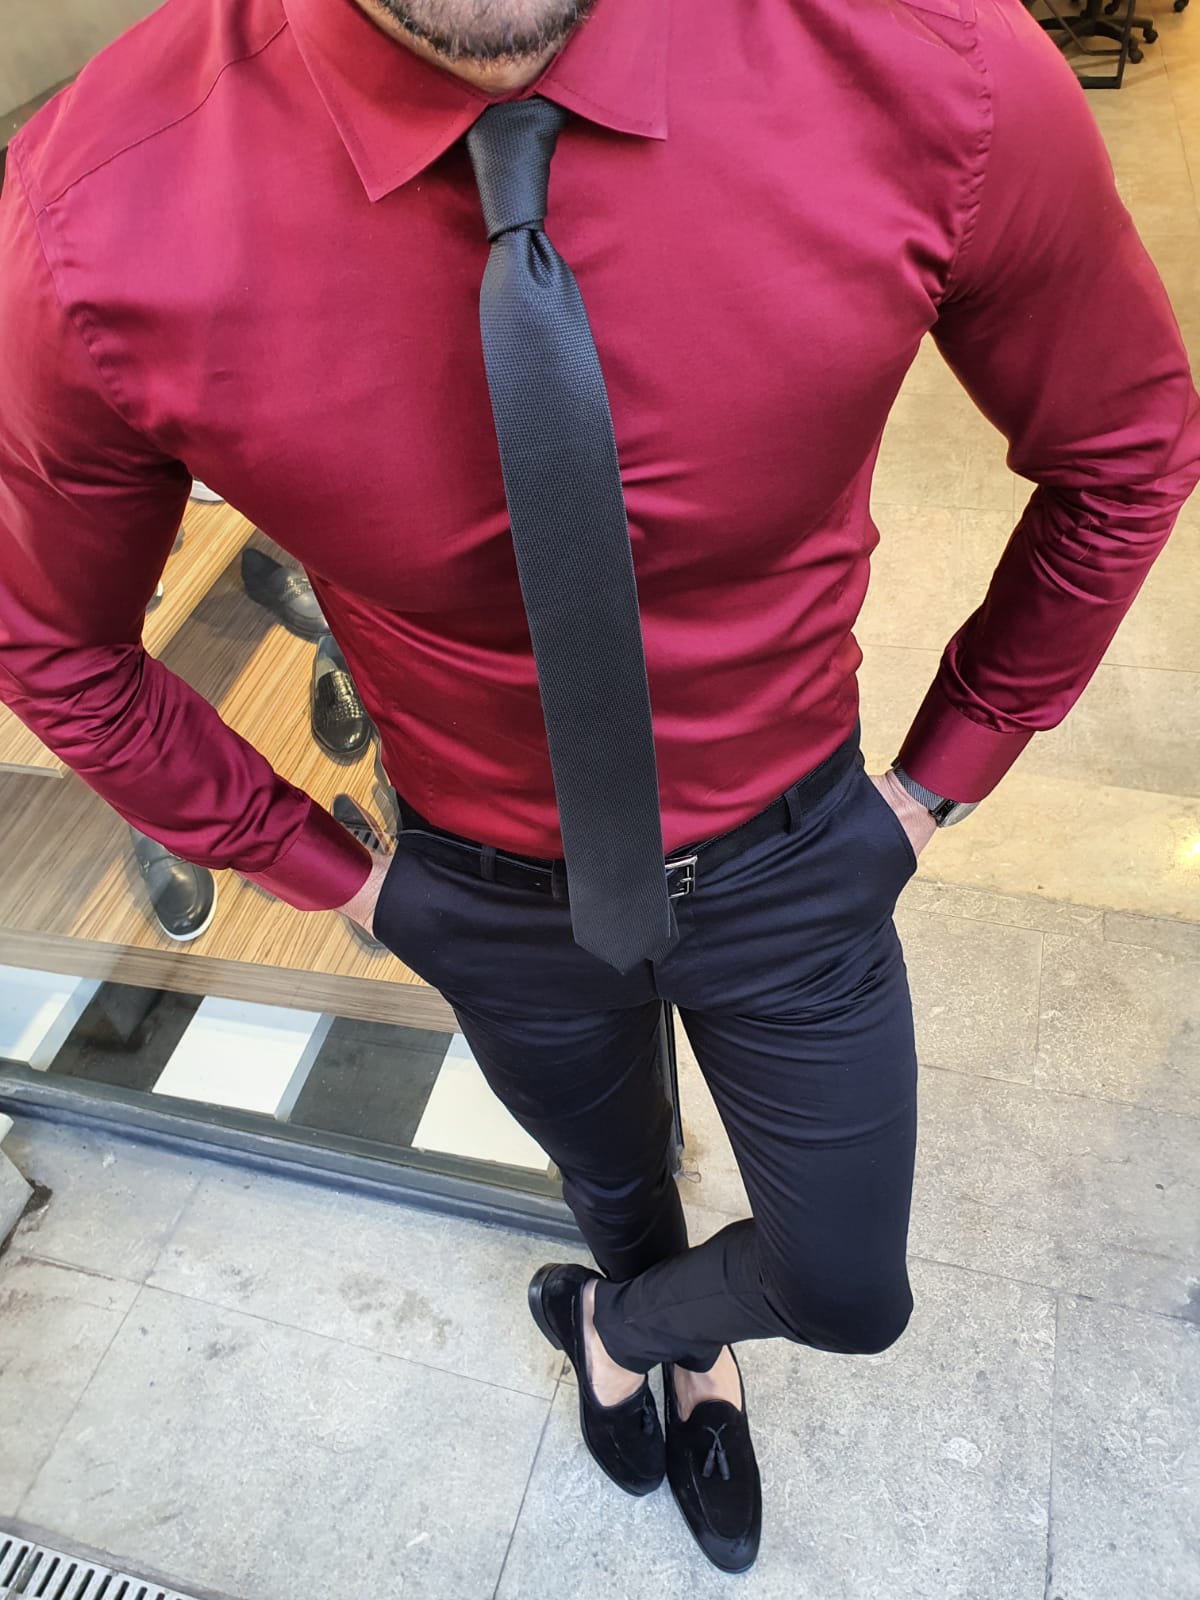 Cotton Maroon Slim Fit Solid Formal Shirt